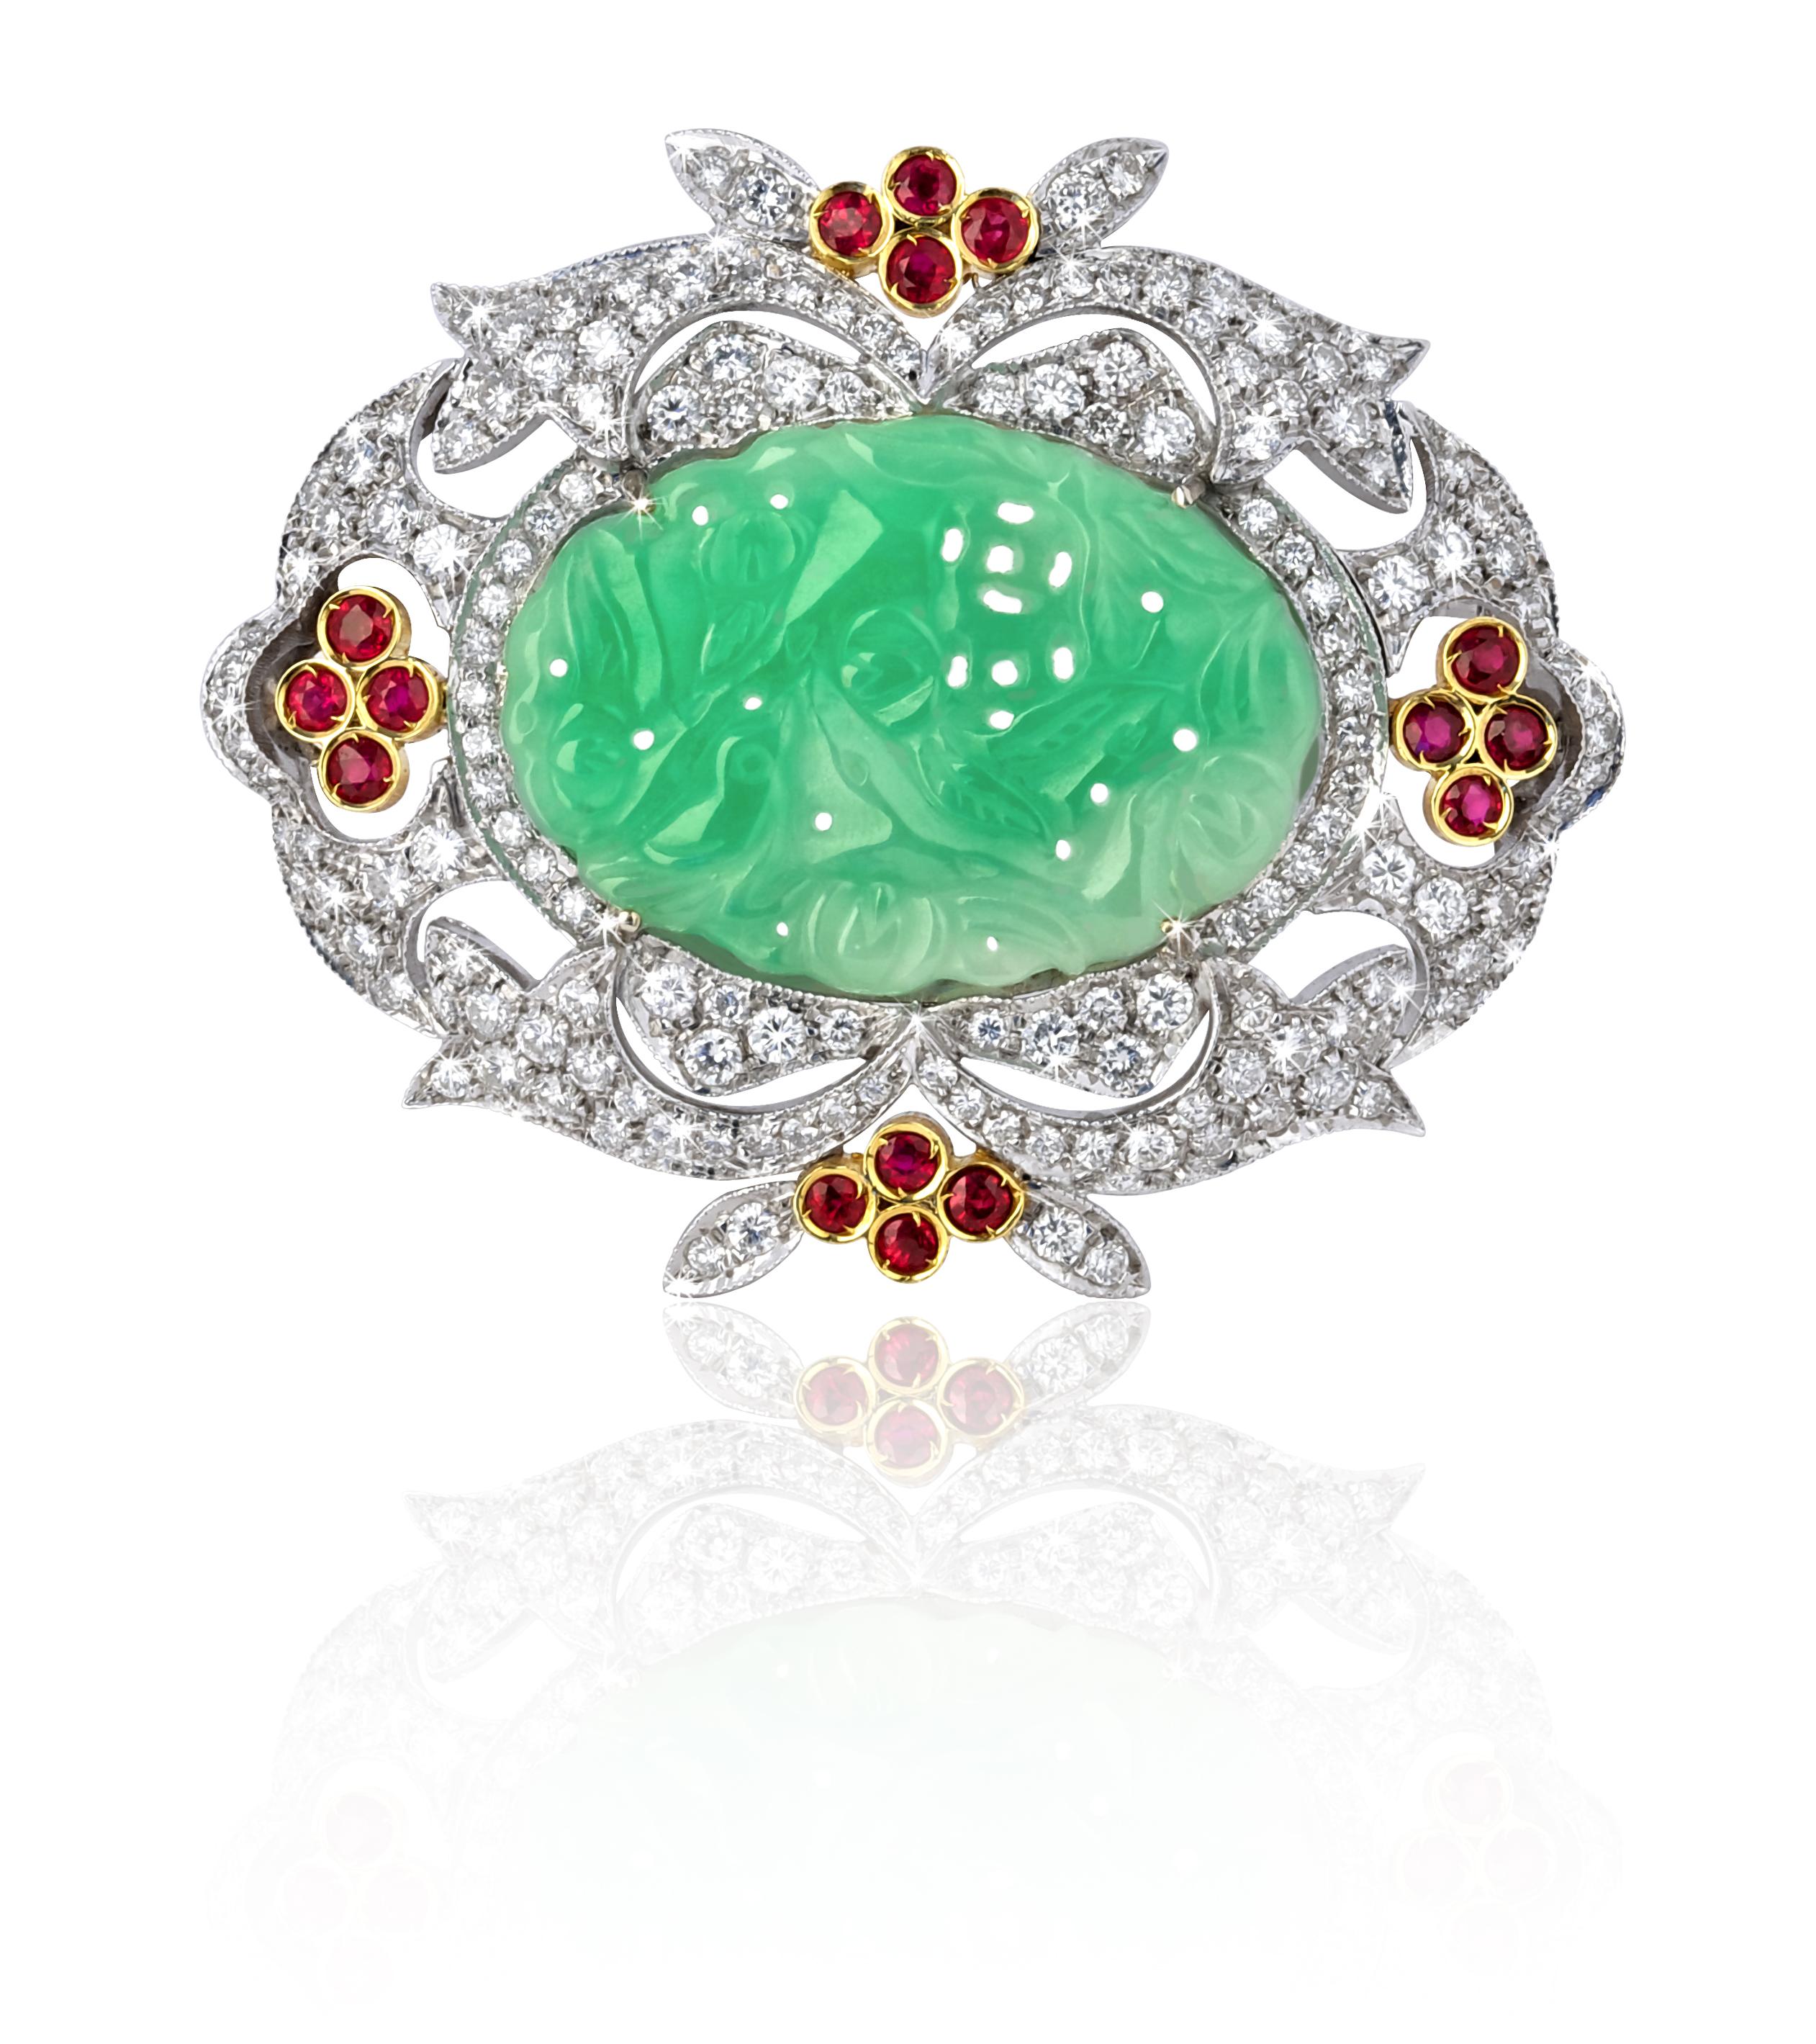 Vintage Jade Brooch From ANGELETTI PRIVATE COLLECTION White and Yellow gold 18kt with Diamonds and Rubies.
This Brooch was Manufactured in ‘60s in Italy by Expert Goldsmith from Valenza.
The Jade is carved by Expert Chinese Hands Representing